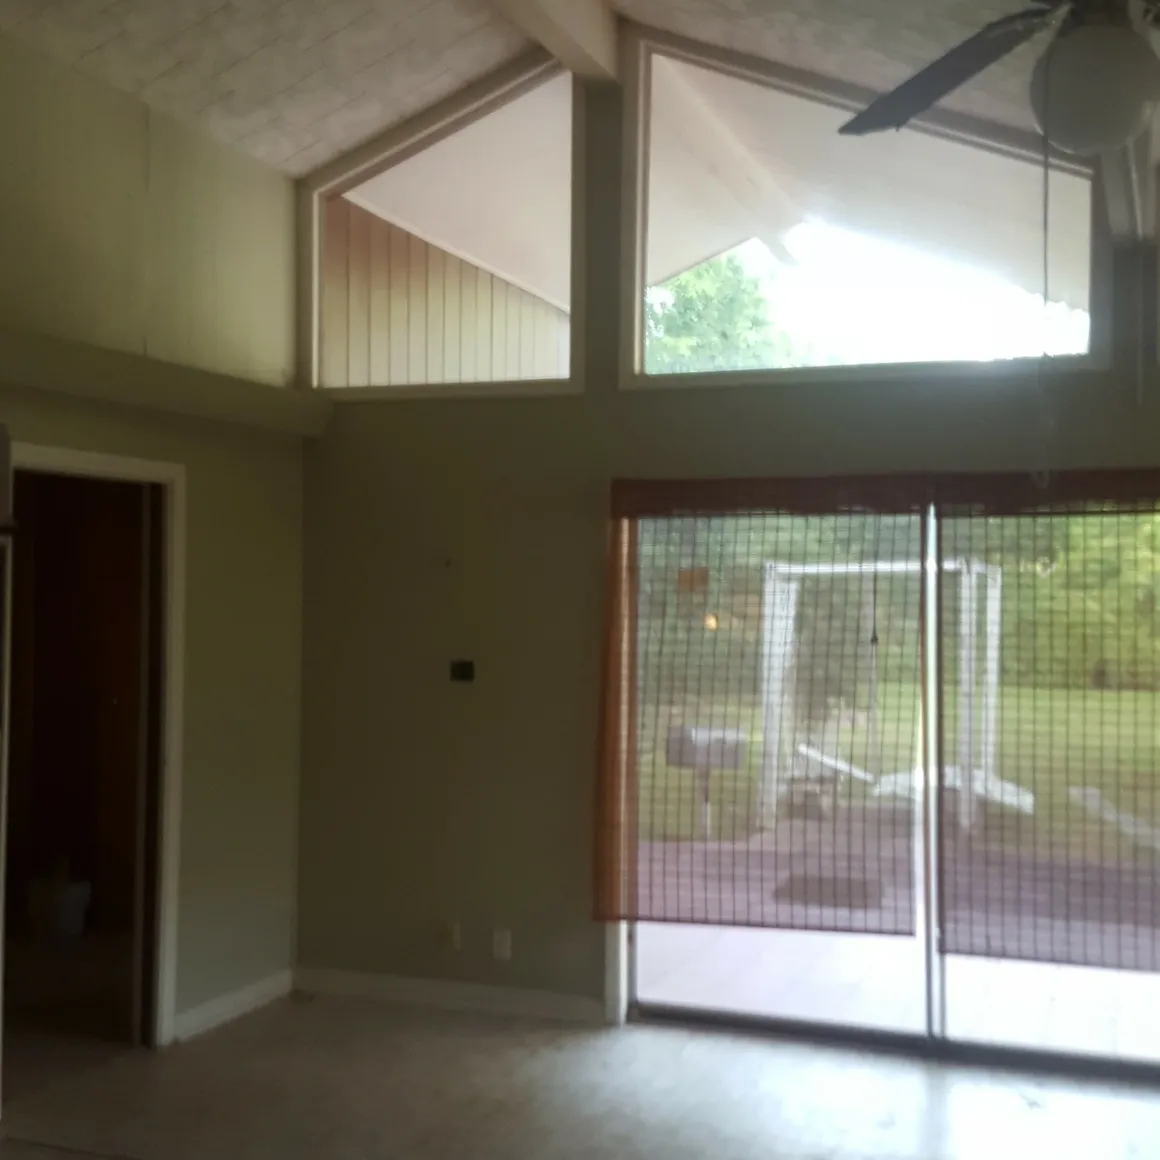 A large open living room with sliding glass doors.